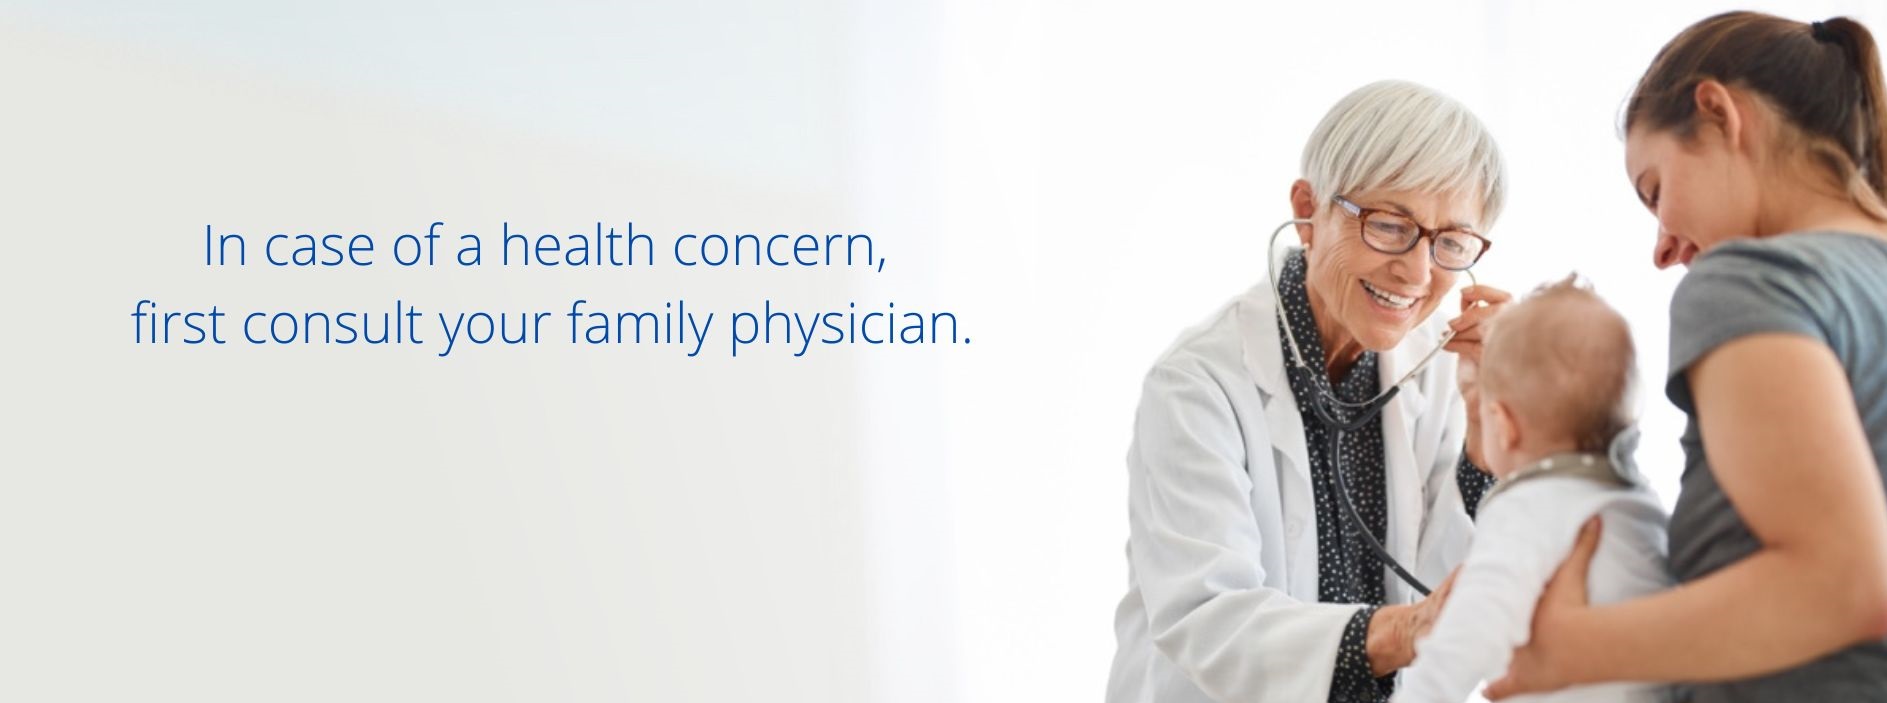 In case of a health concern, first consult your family physician.